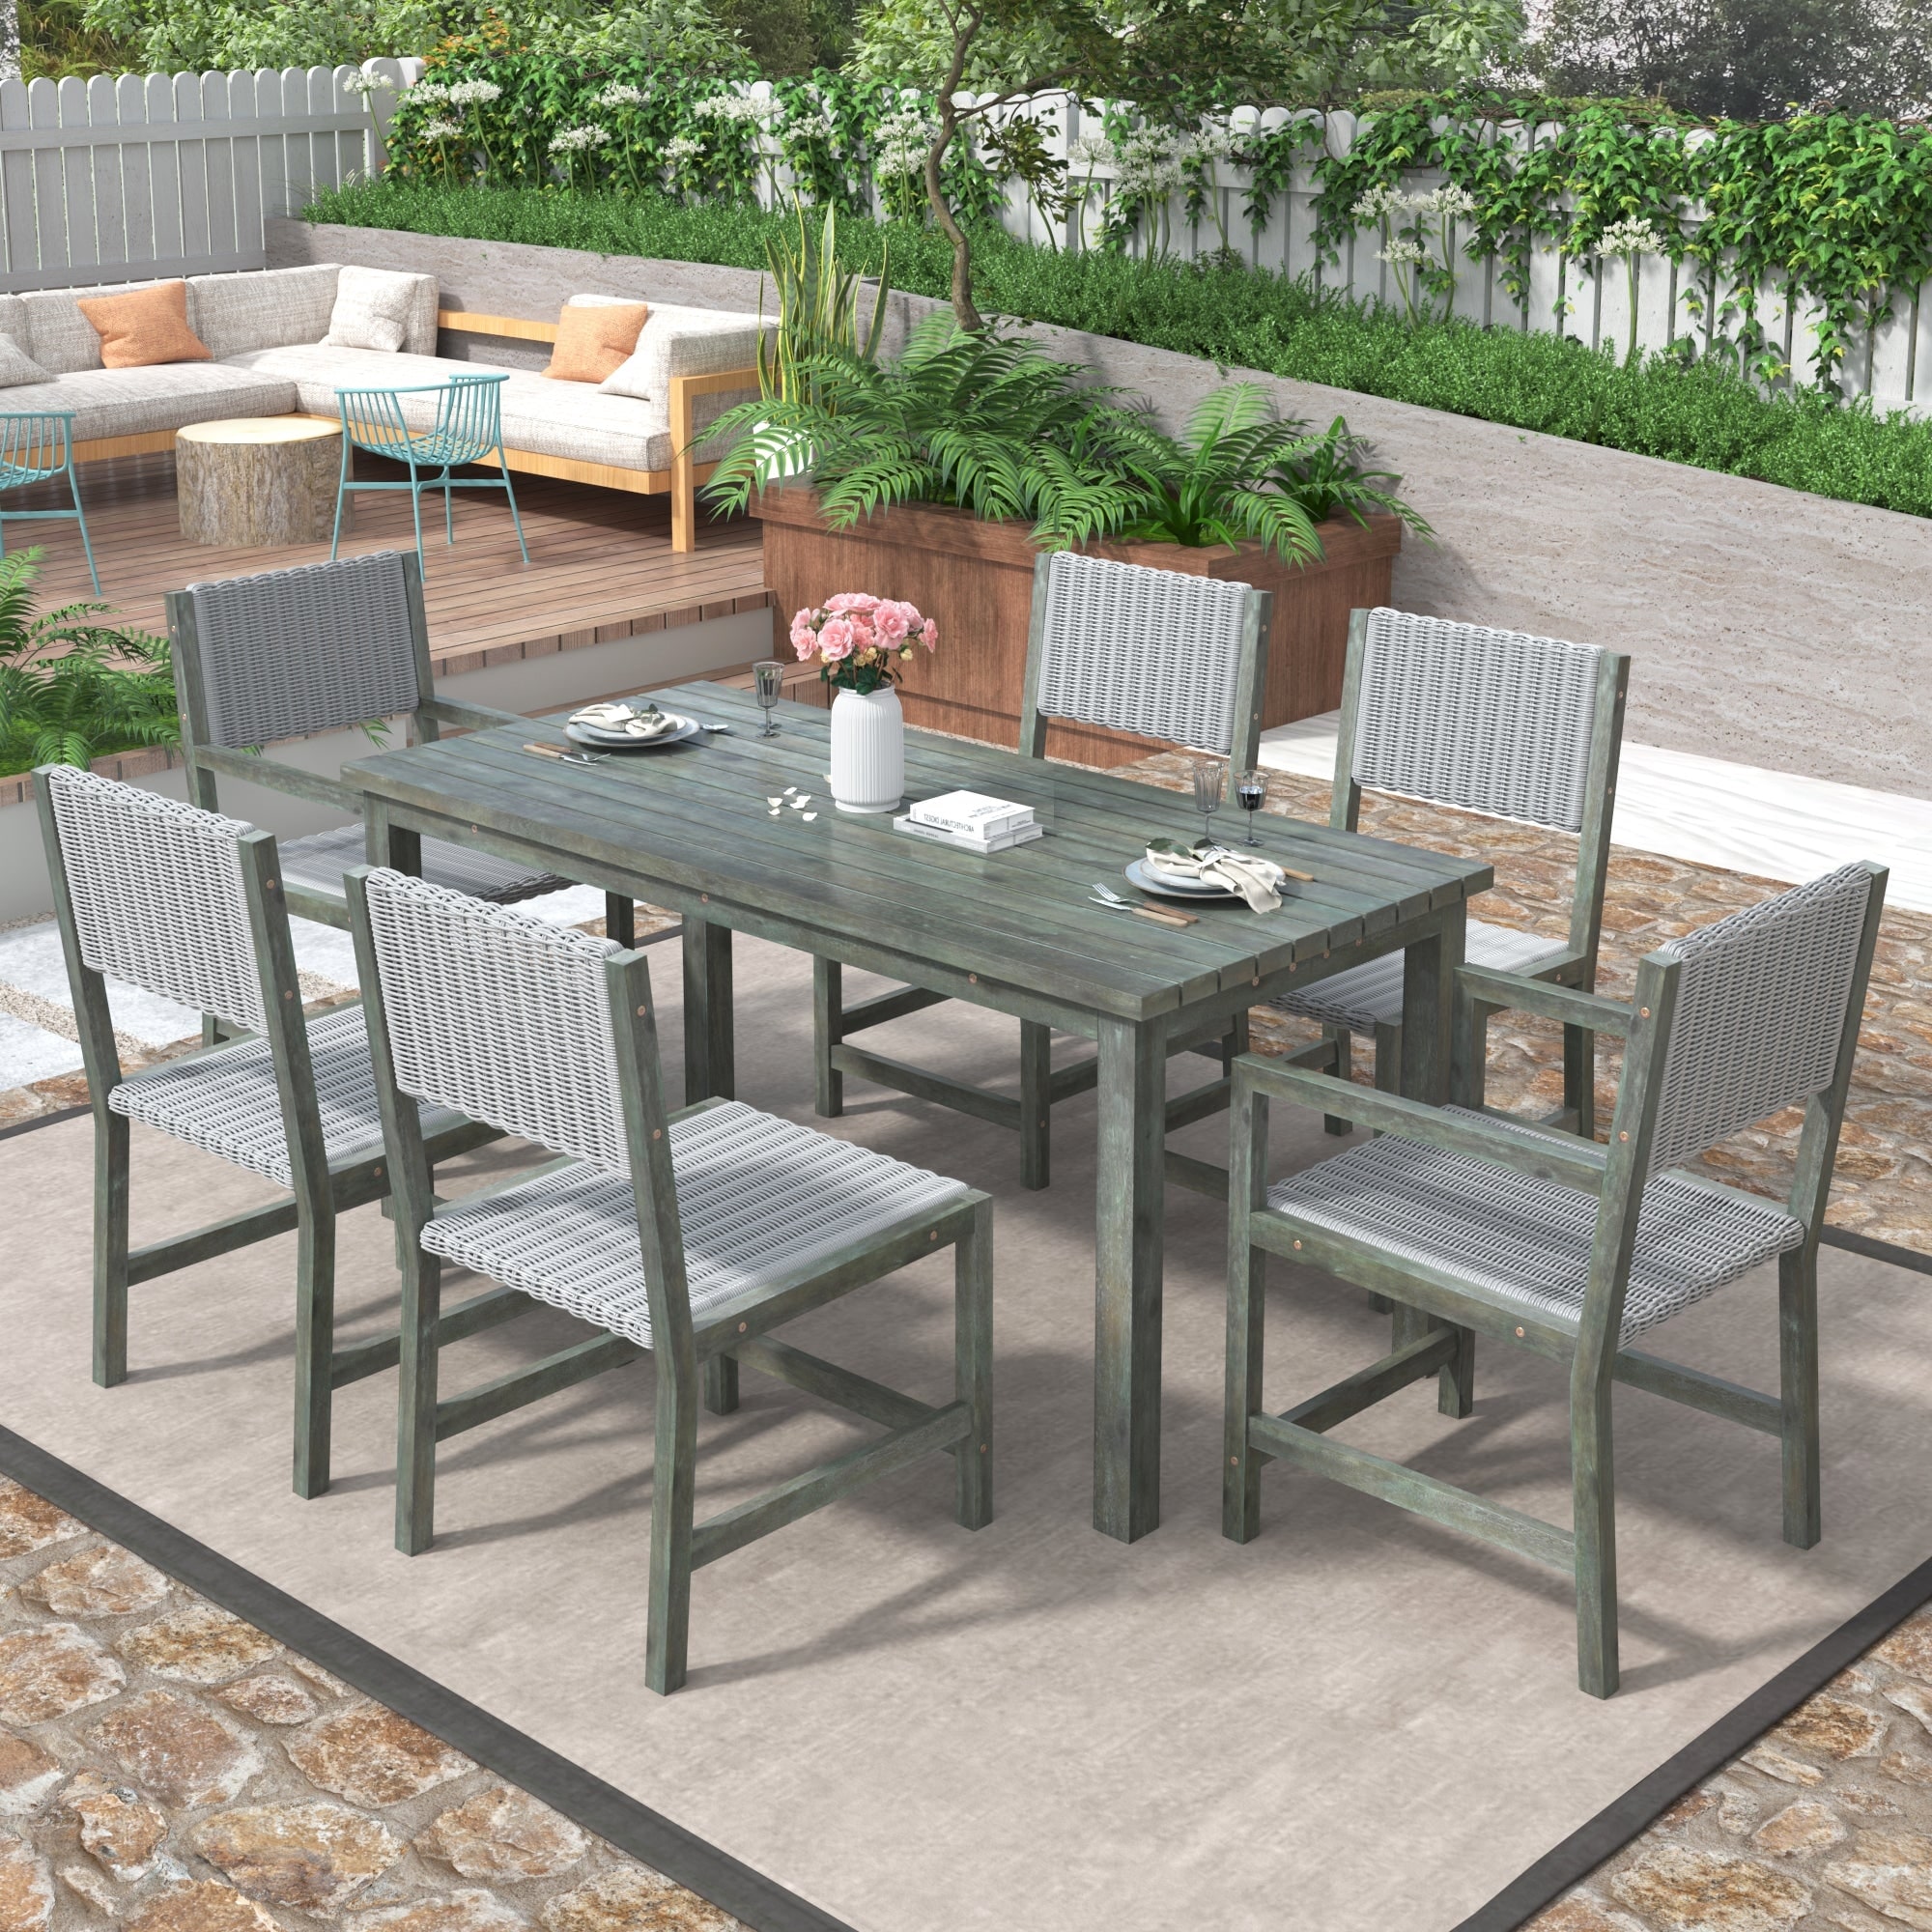 Patio Outdoor Wood Rattan Dining Set With Chairs For 6 People